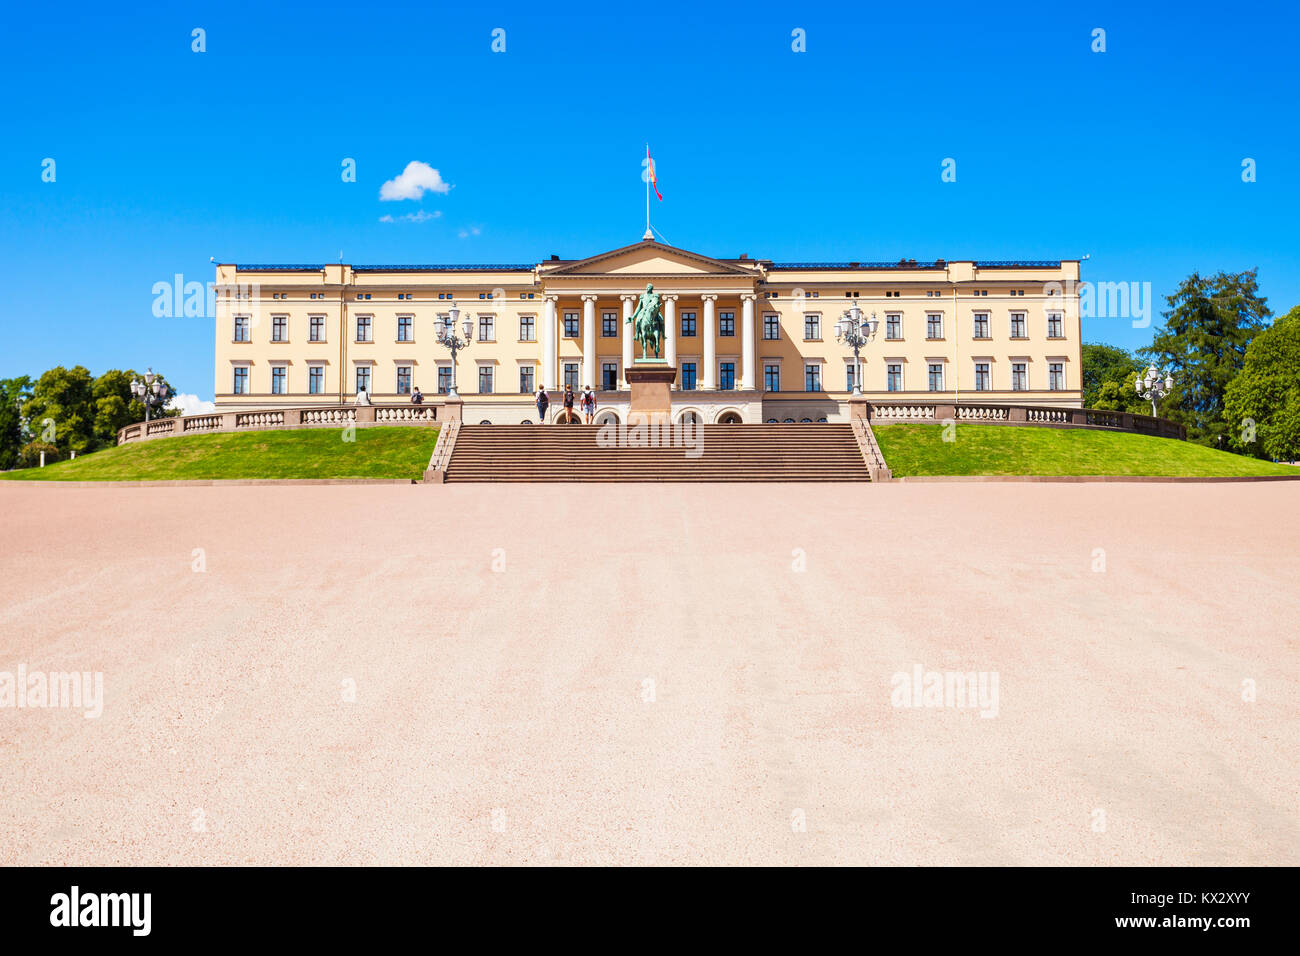 Royal Palace in Oslo, Norway. Royal Palace is the official residence of the present Norwegian monarch. Stock Photo